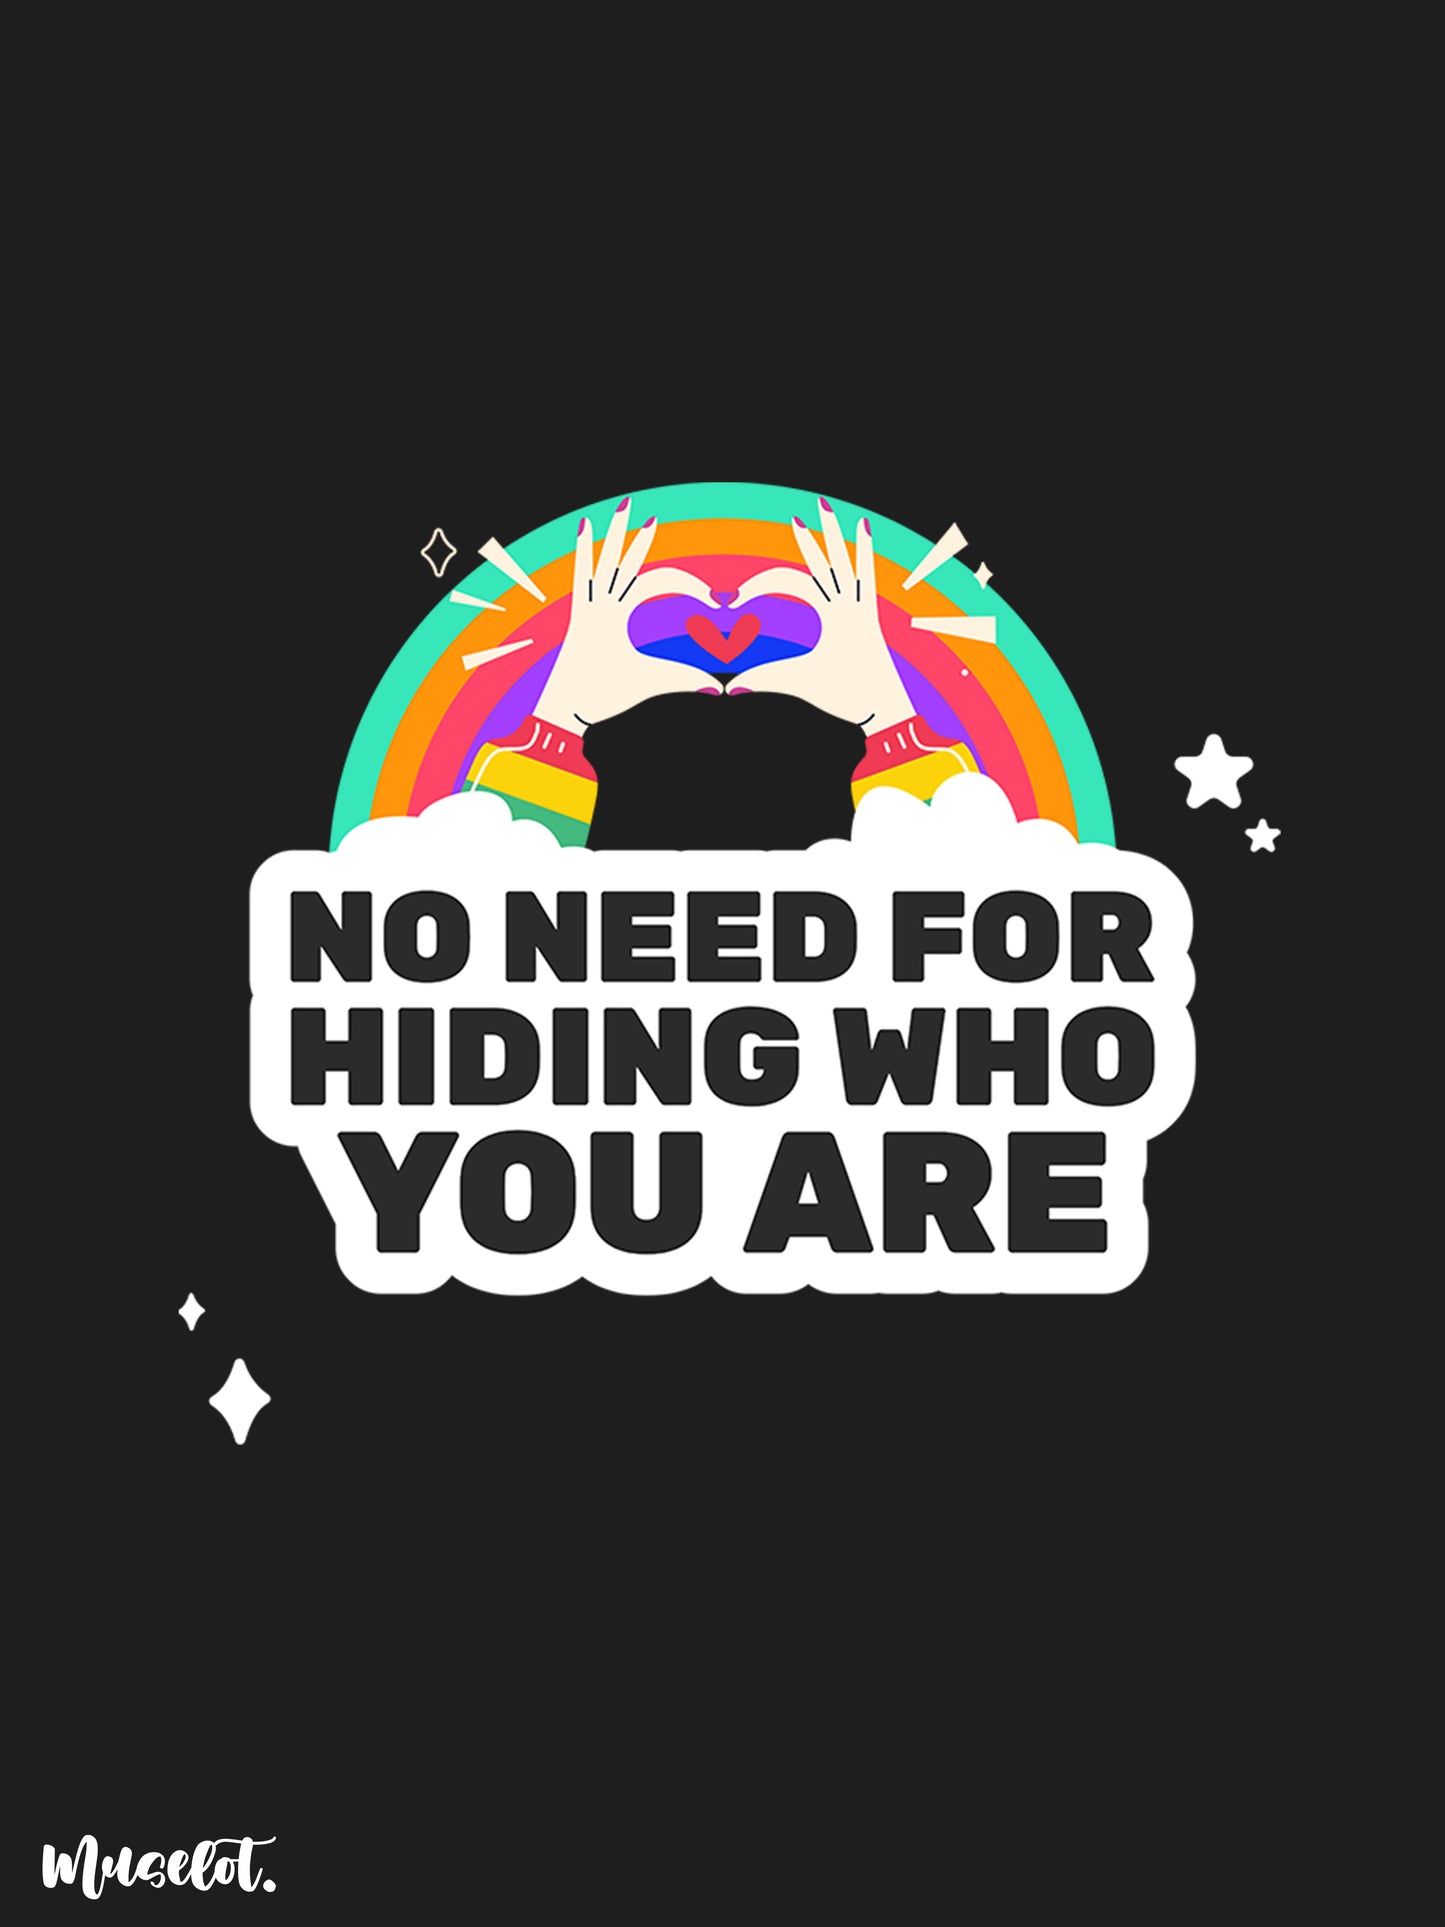 No need for hiding who you are design illustration for LGBTQ+ pride community at Muselot